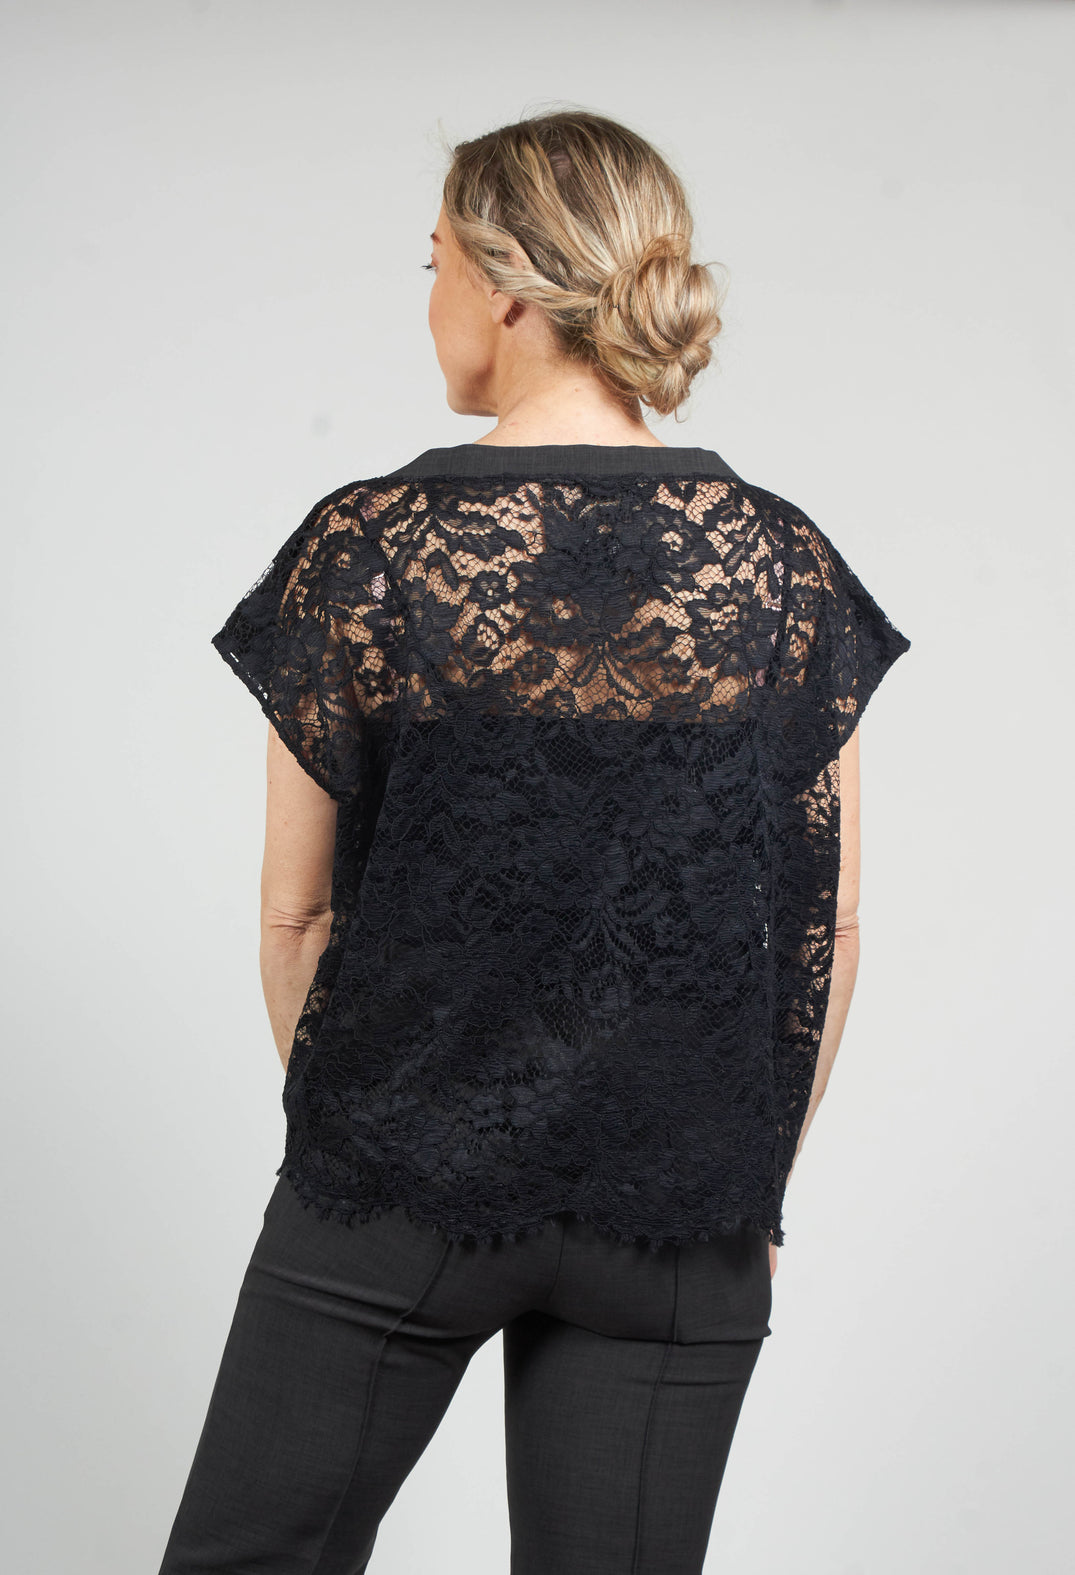 Wide Crop Top with Lace Back in Black/Charcoal